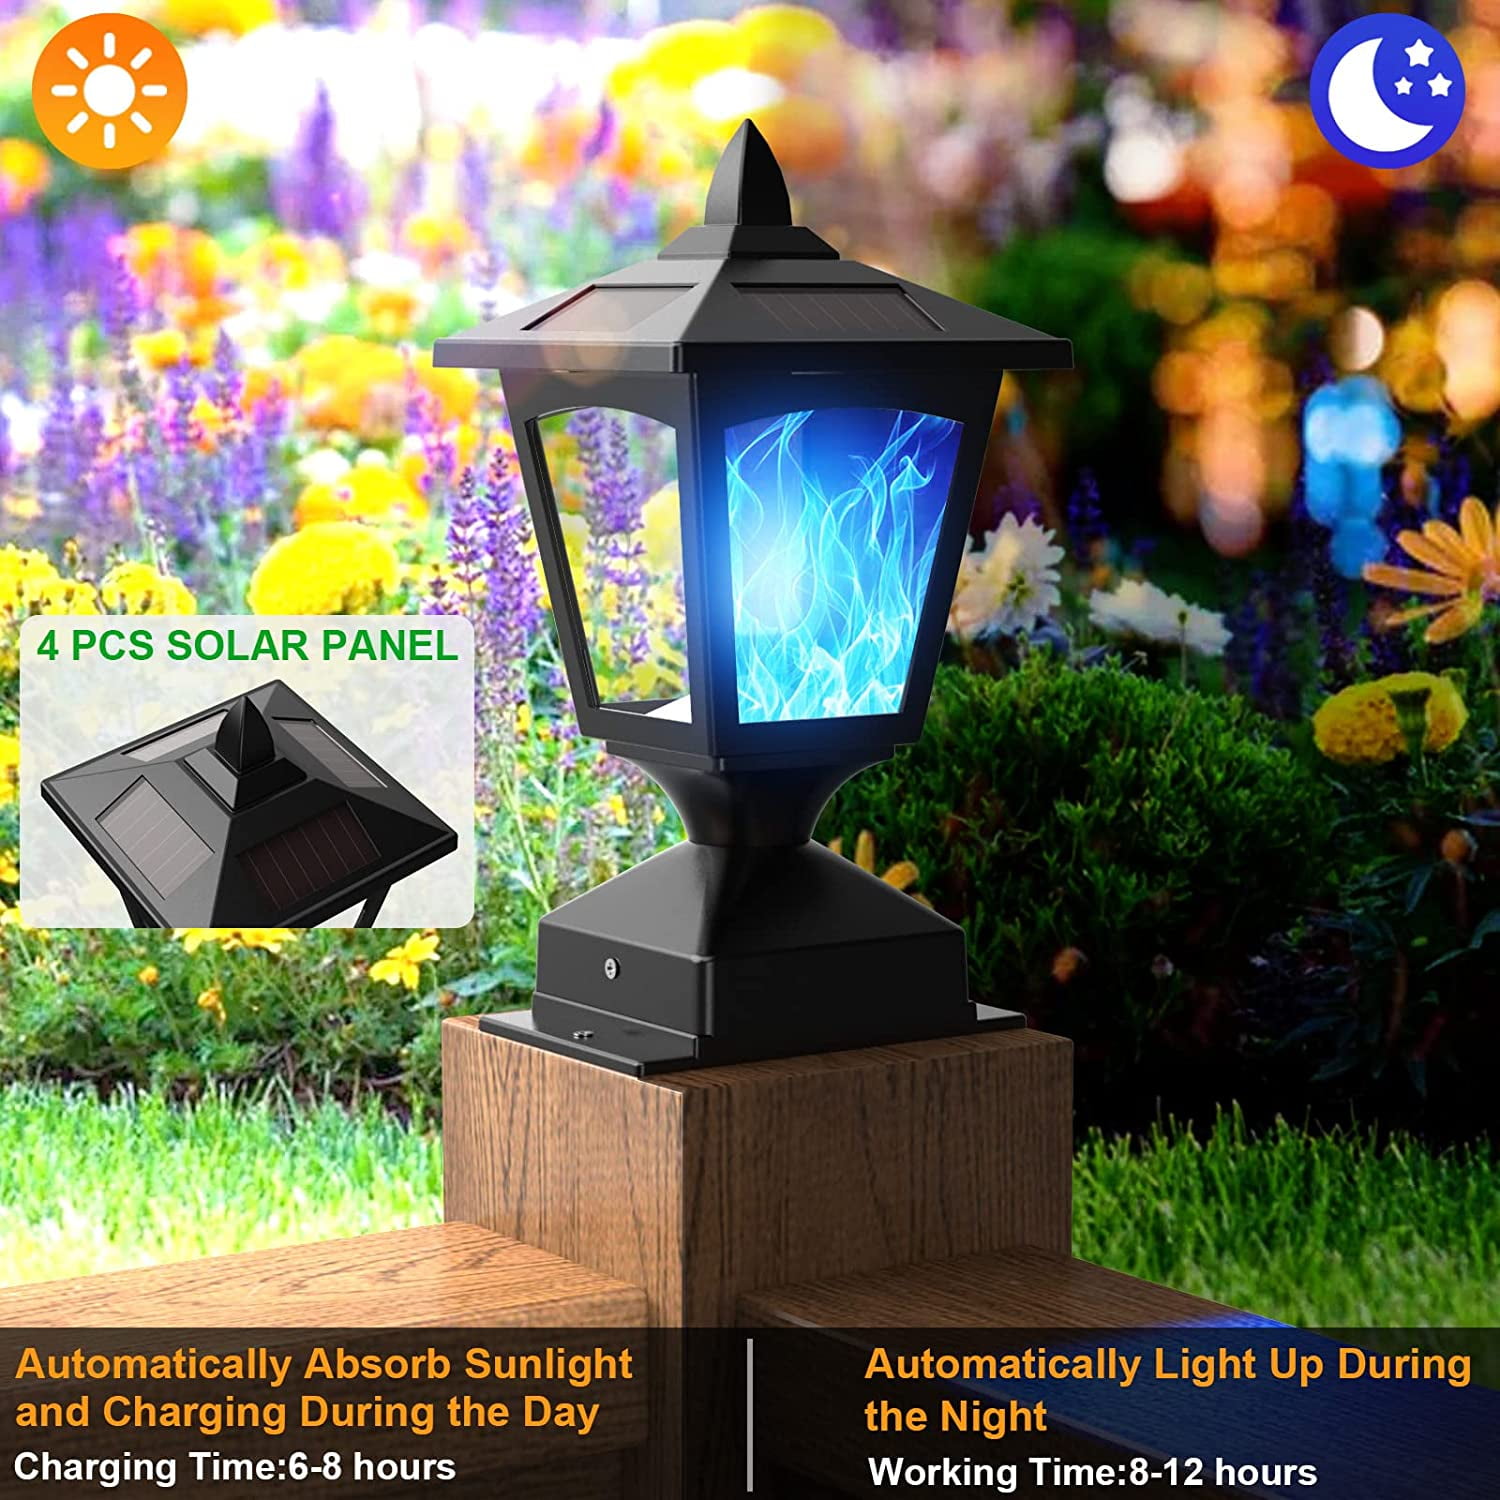 Solar Post Flame Light,Outdoor Deck Fence Post Cap LED Light,Waterproof 4x4  5x5 6x6 Black Post Top Solar Powered Light with Flickering Flame for Garden  Outside,2 Pack, Black-Blue Light